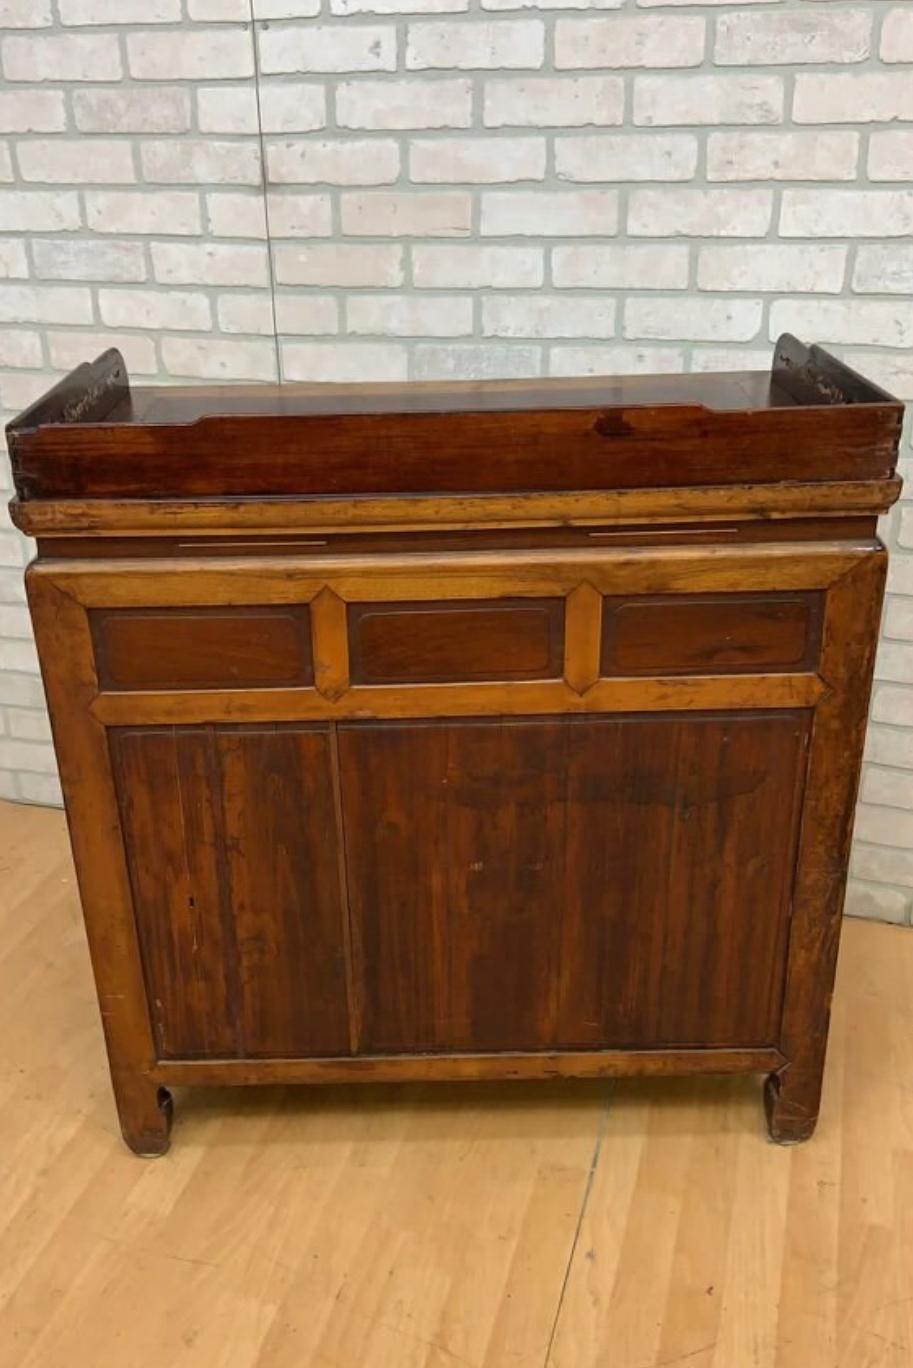 Antique Chinese Jiangsu Province Rosewood with Bone Inlay Sideboard Cabinet For Sale 3